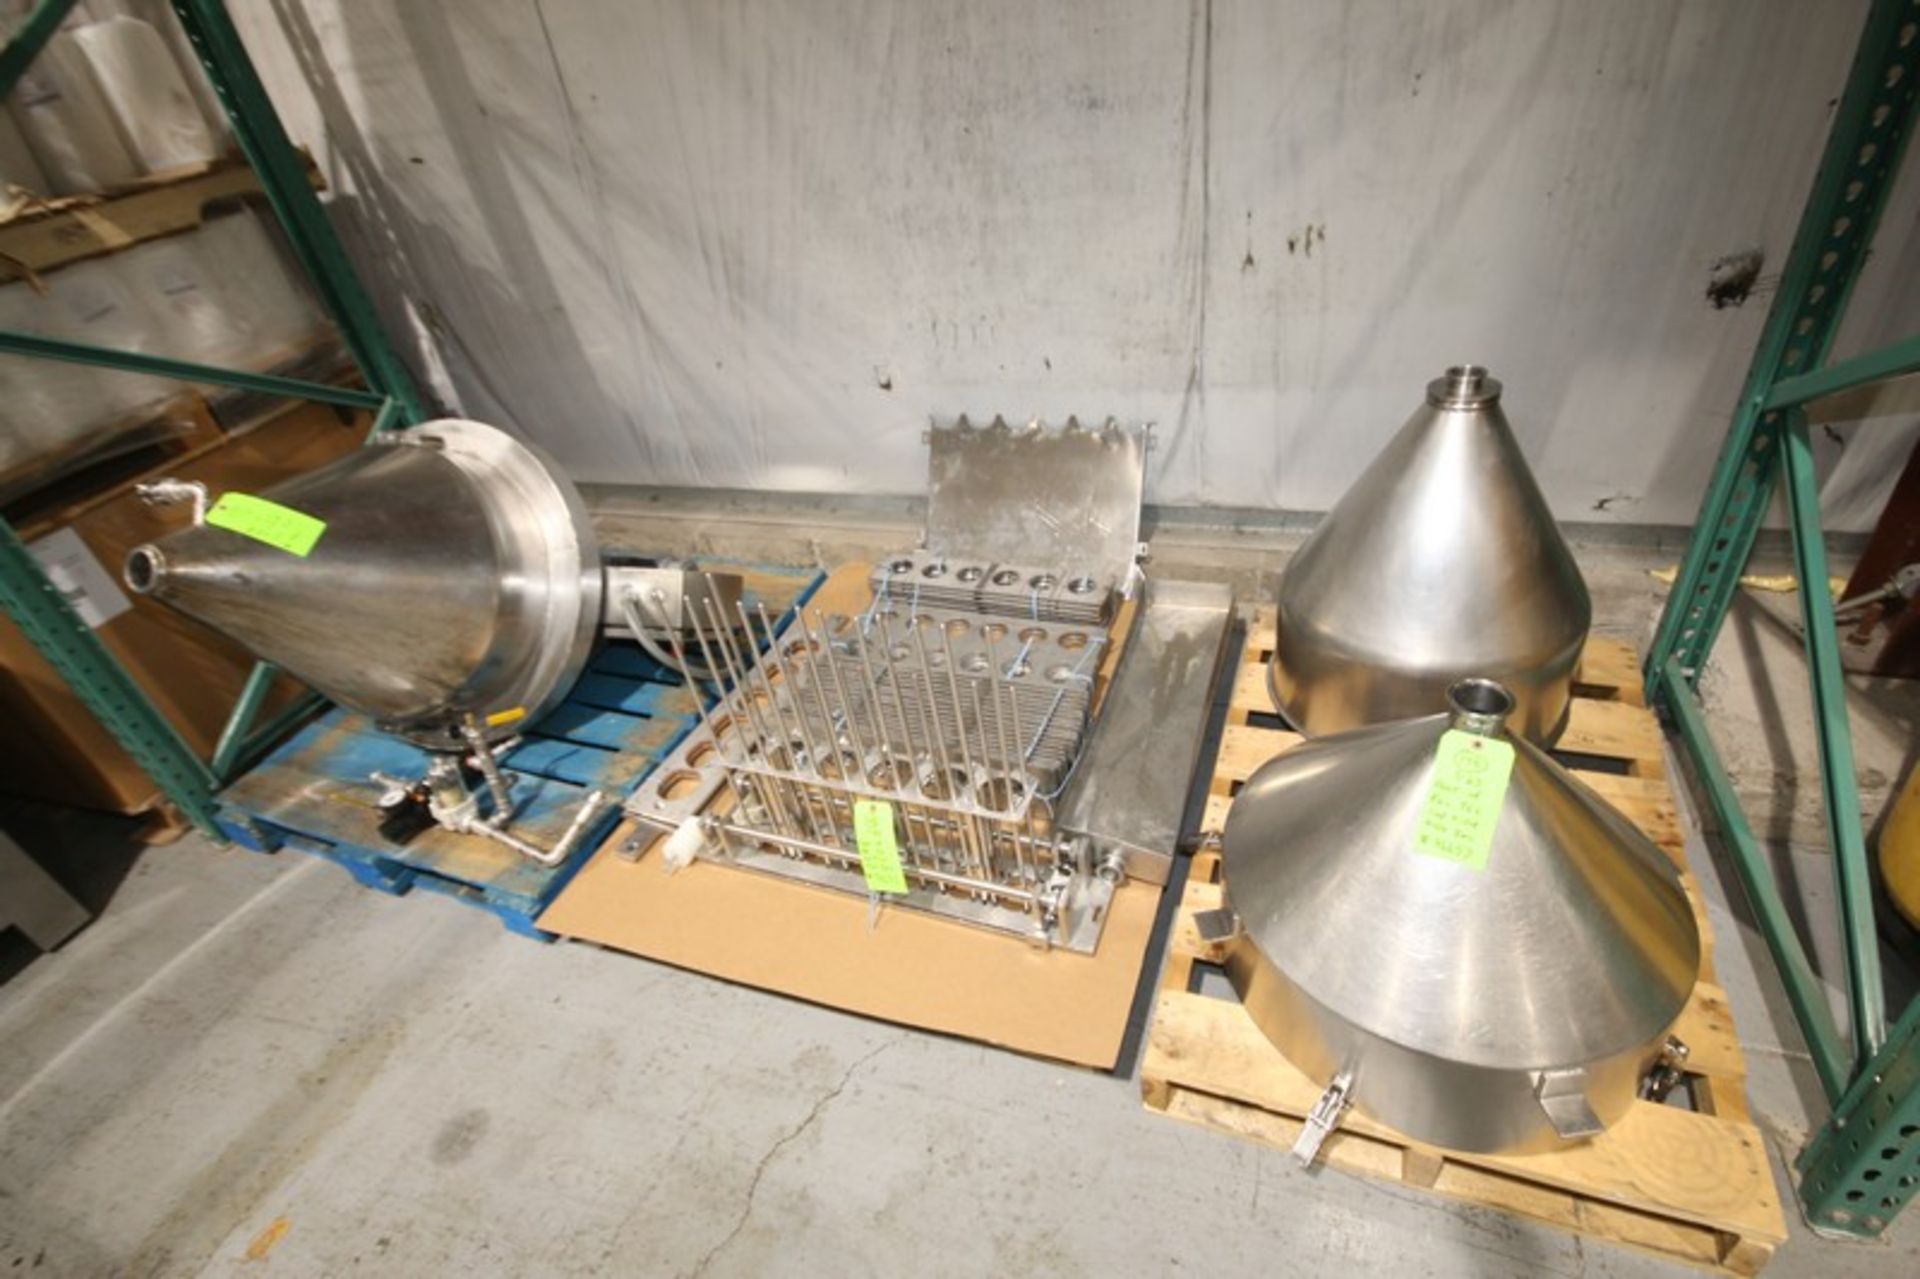 2008 PAC Tec 4 - Wide S/S Cup Filler, SN 2201, with 4 1/4" W Change Parts, Cup Inserter, Tamper - Image 12 of 13